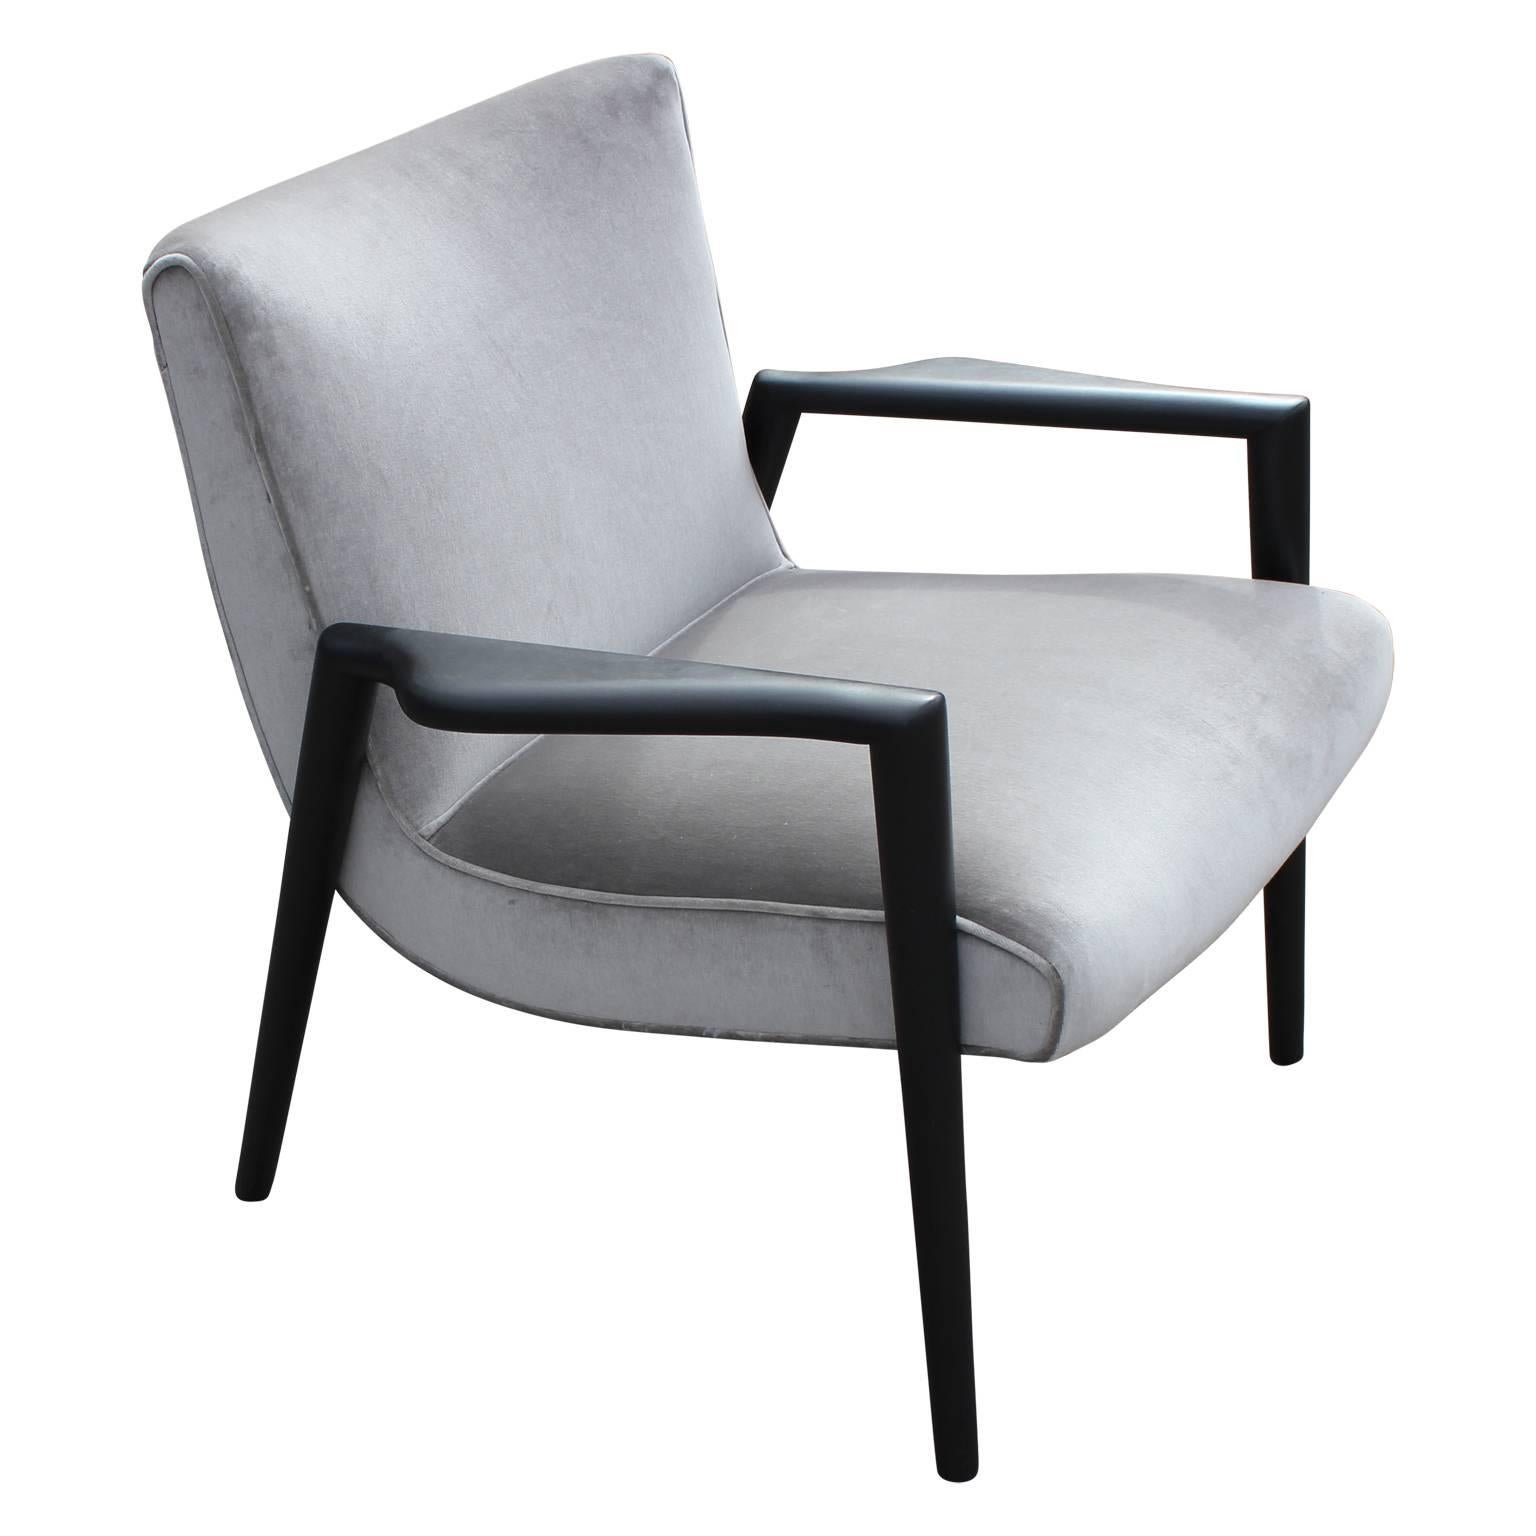 Mid-20th Century Pair of Modern Paul McCobb Style Silver Velvet and Charcoal Lounge Chairs